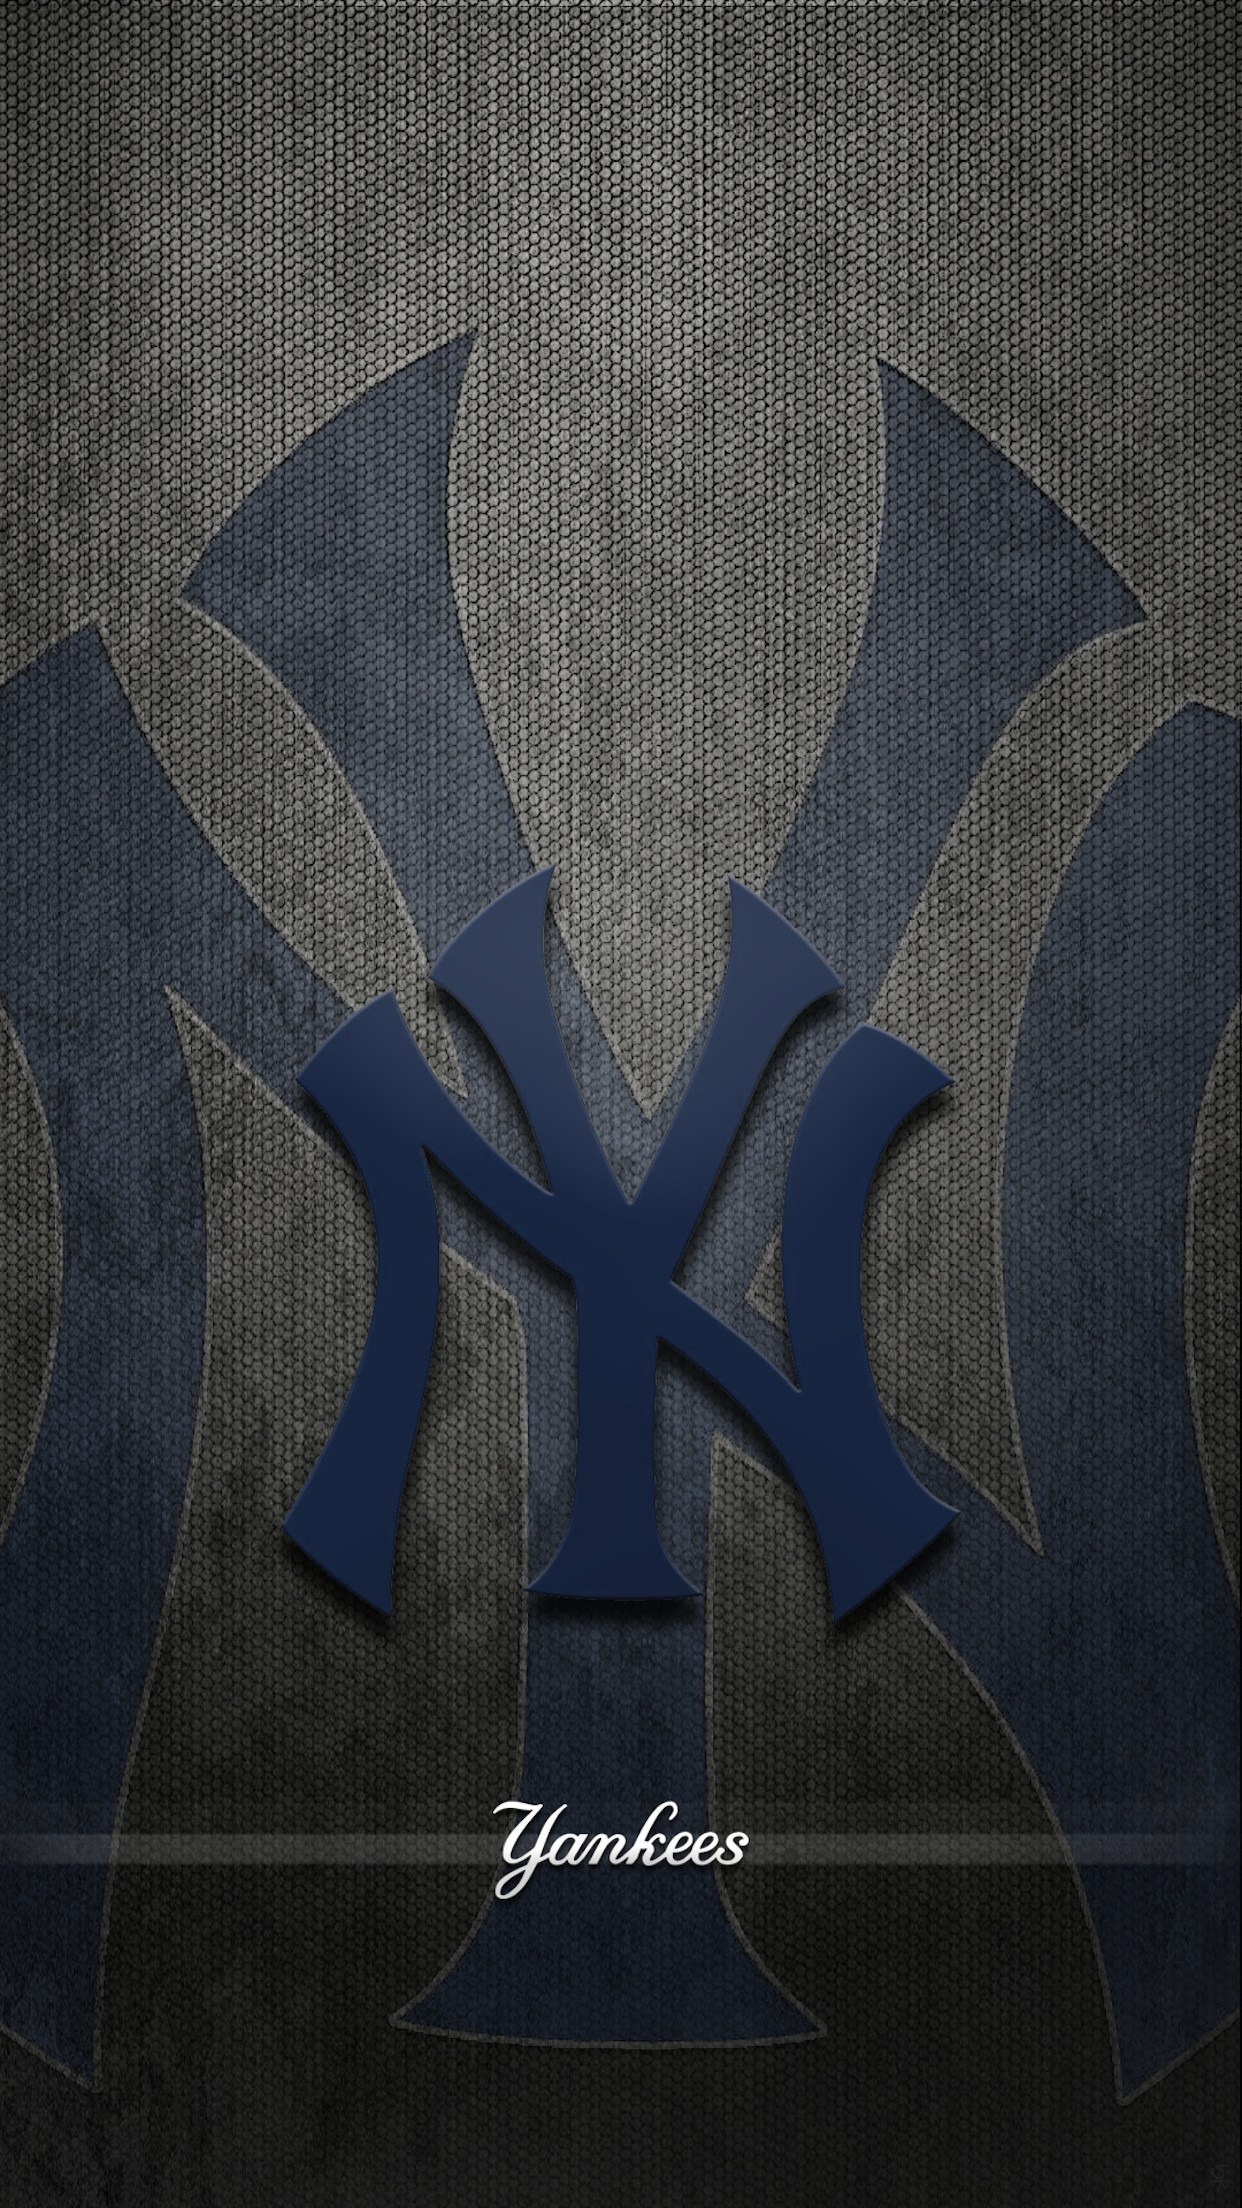 new york yankees iphone wallpaper,blue,font,pattern,tile,calligraphy